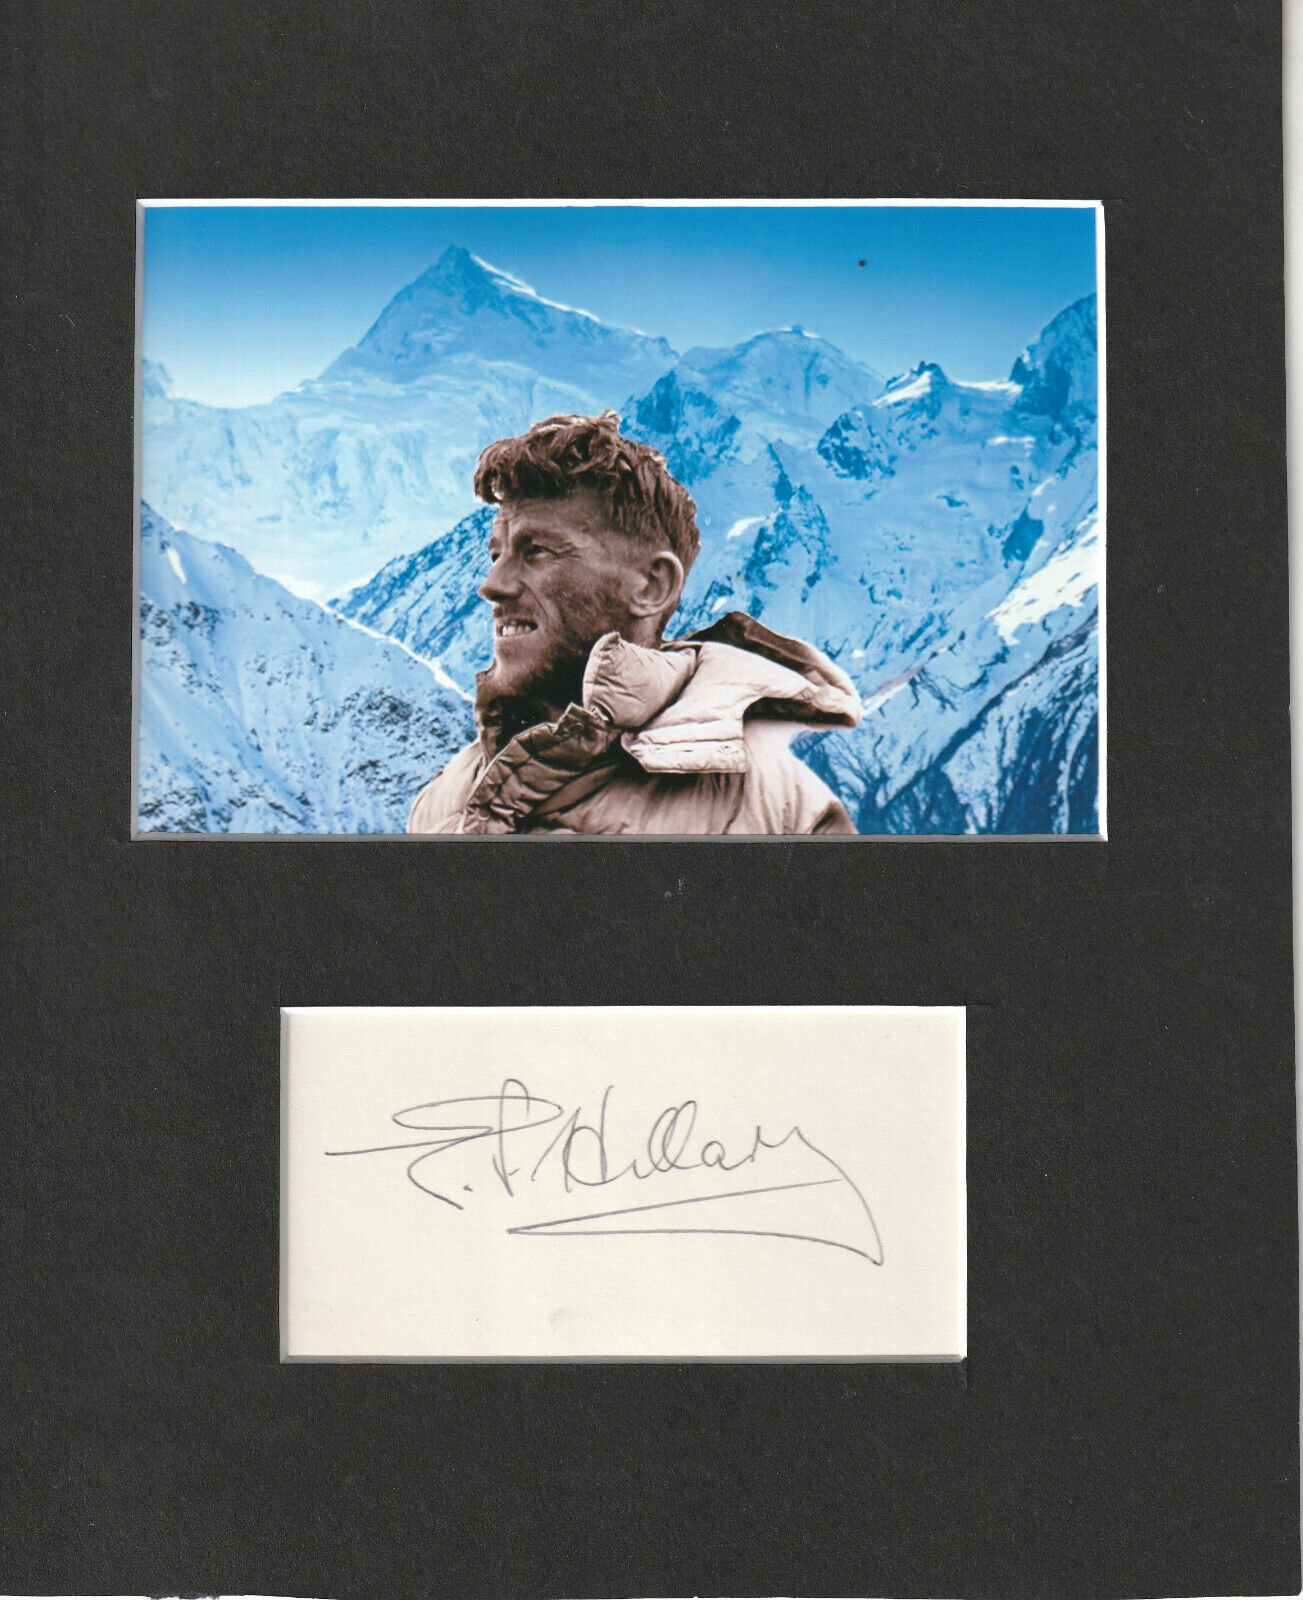 Sir Edmund Hillary signed matted with photo frame size 8x10 COA D23